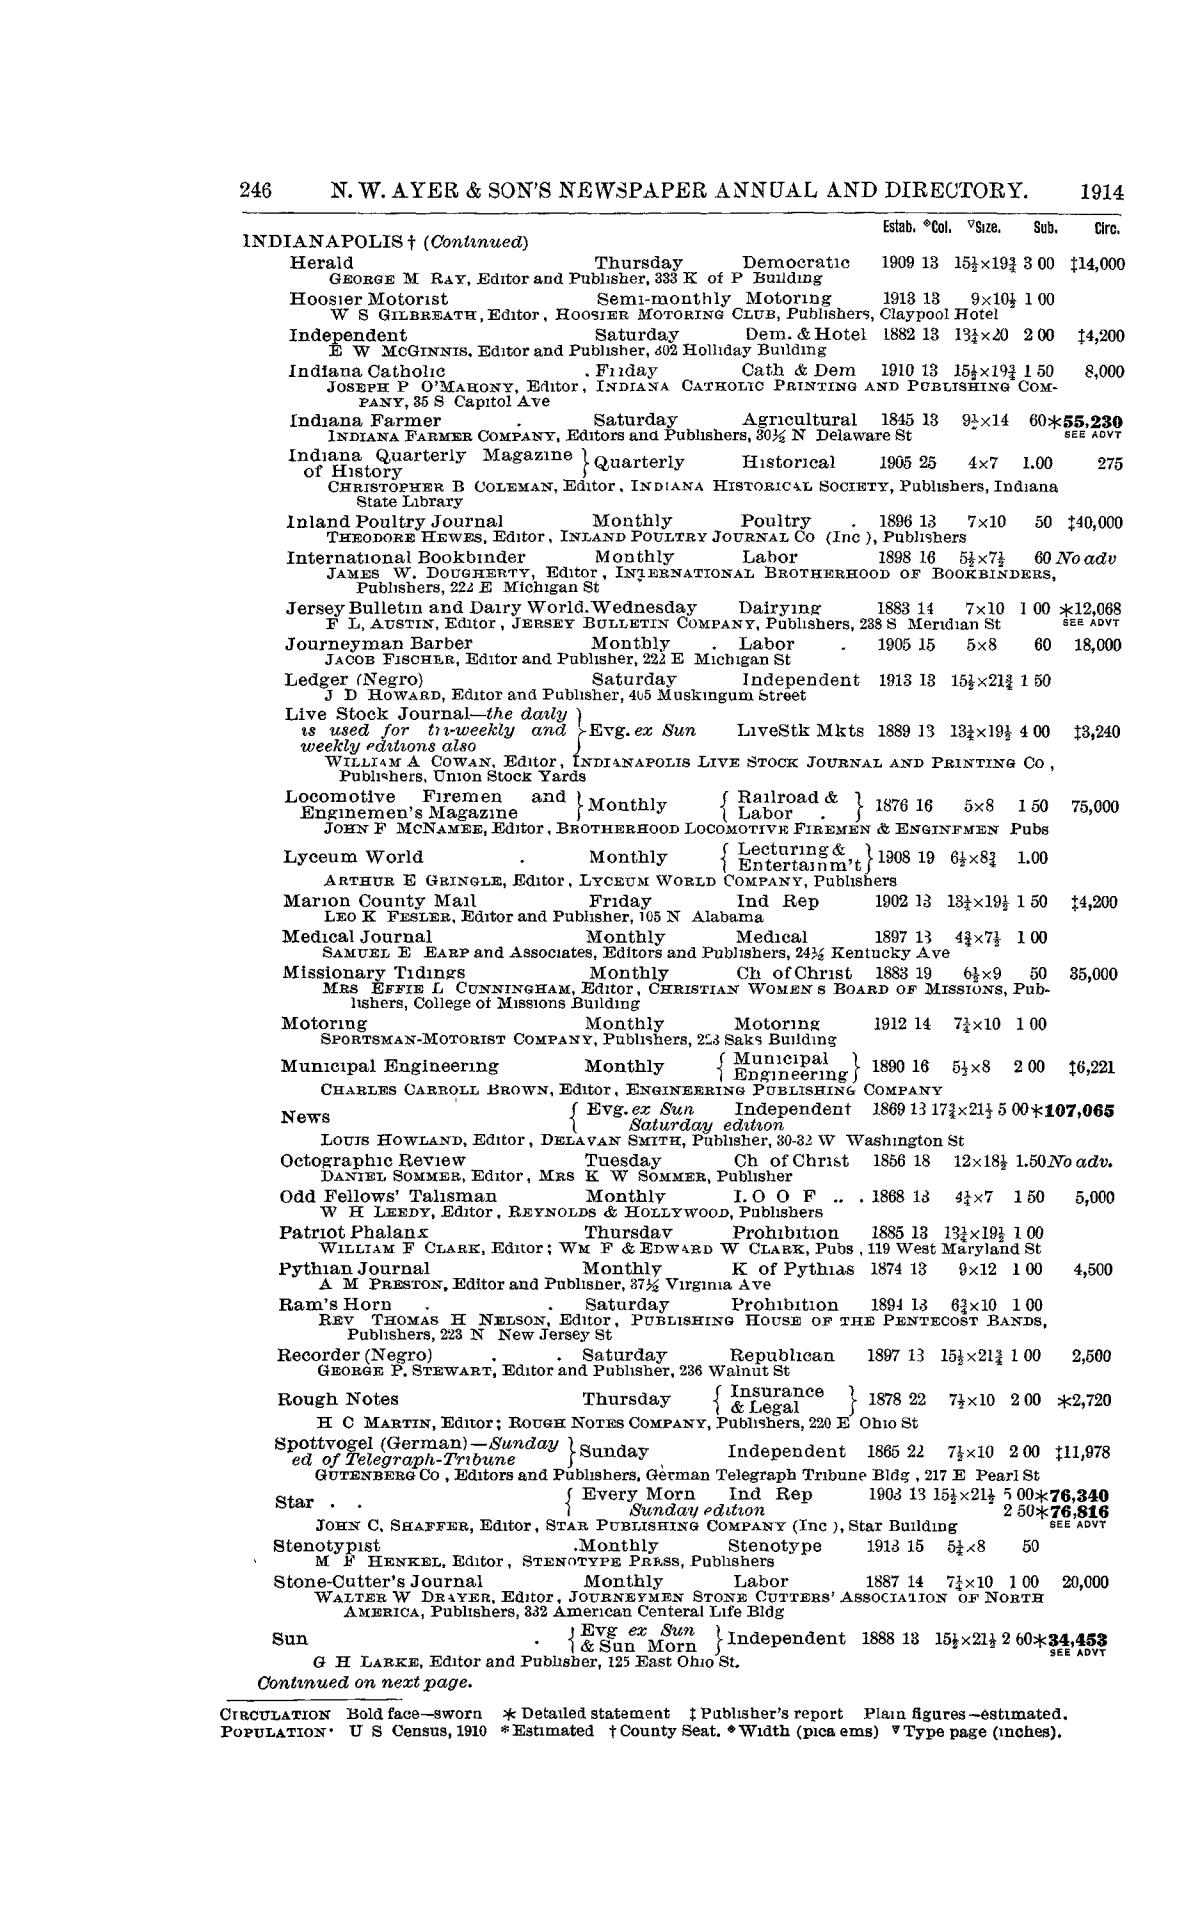 N. W. Ayer & Son's American Newspaper Annual and Directory: A Catalogue of American Newspapers, 1914, Volume 1
                                                
                                                    246
                                                